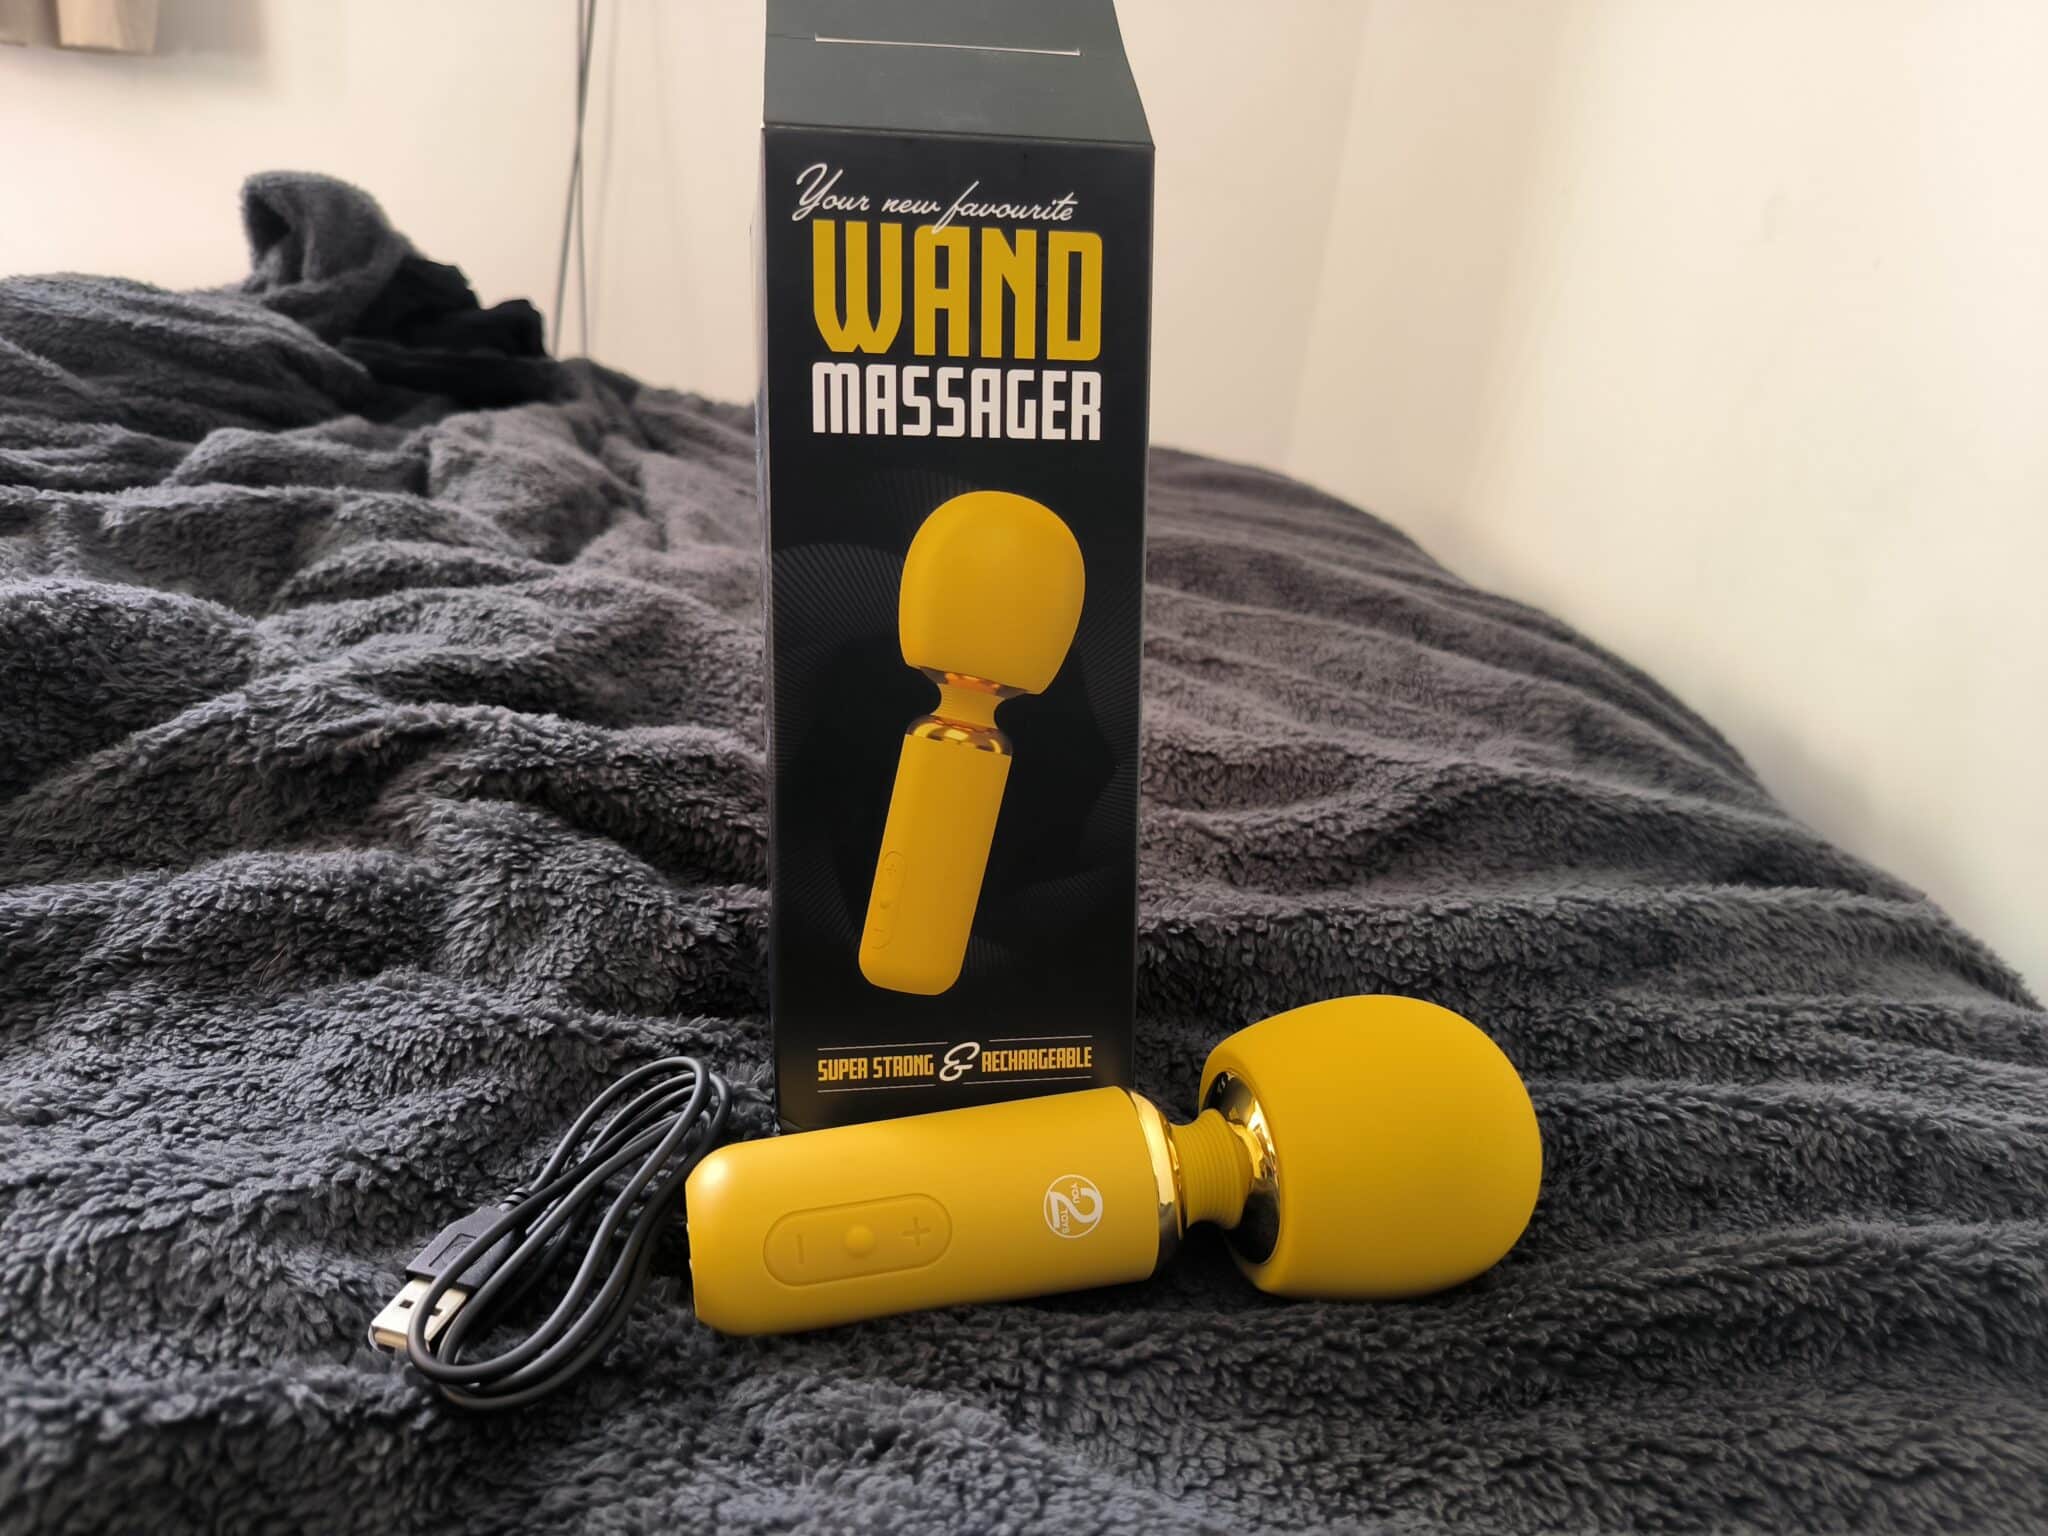 Your New Favorite Wand Massager Ease of Use